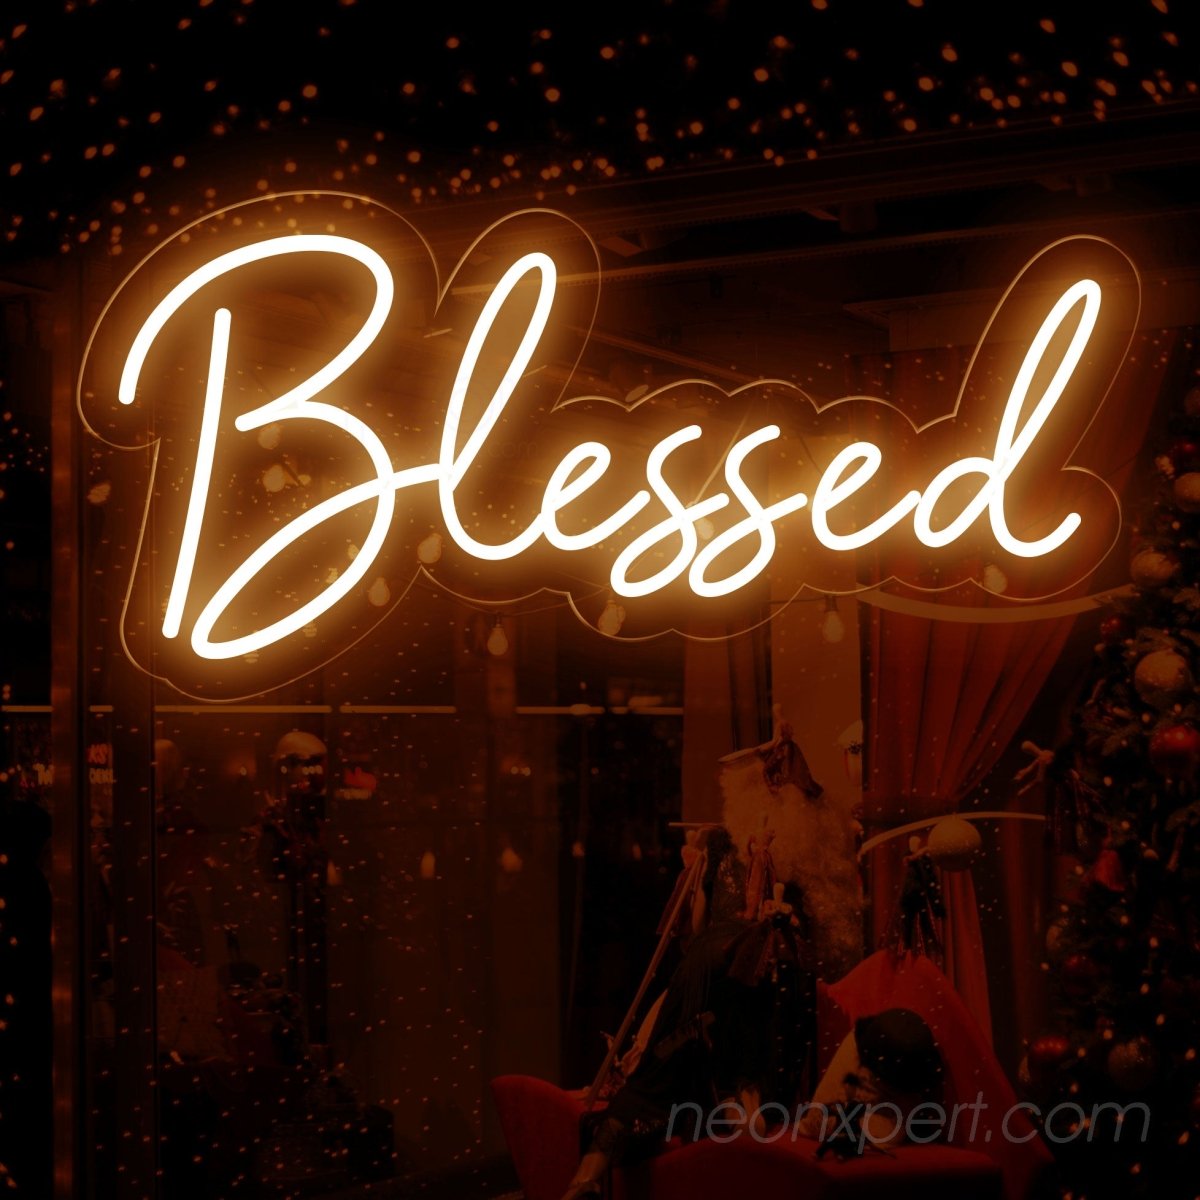 Blessed LED Neon Sign – Light Up Your Space with LED Light - NeonXpert